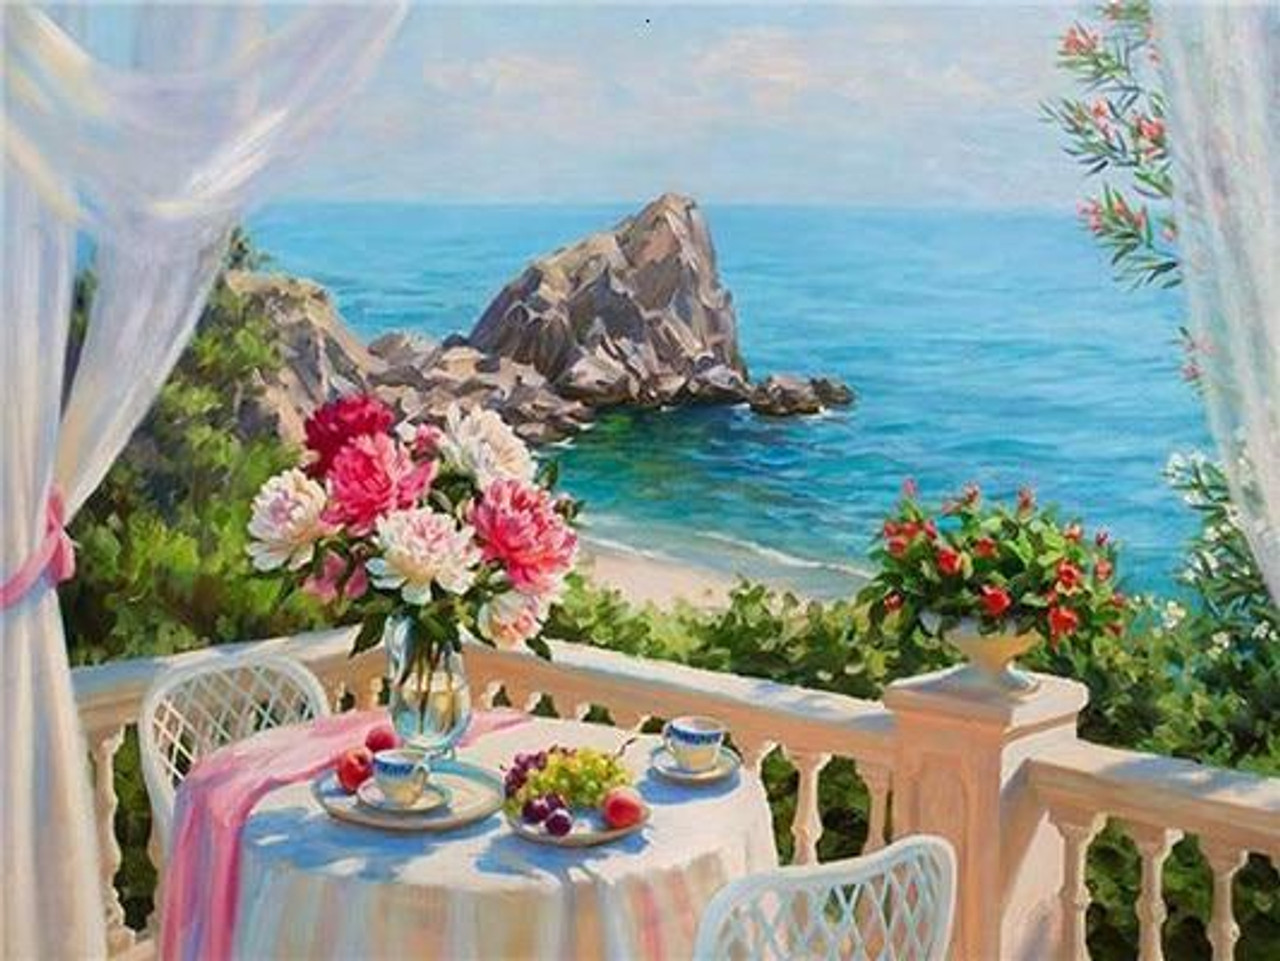 5D Diamond Painting Table with Flowers by the Sea Kit